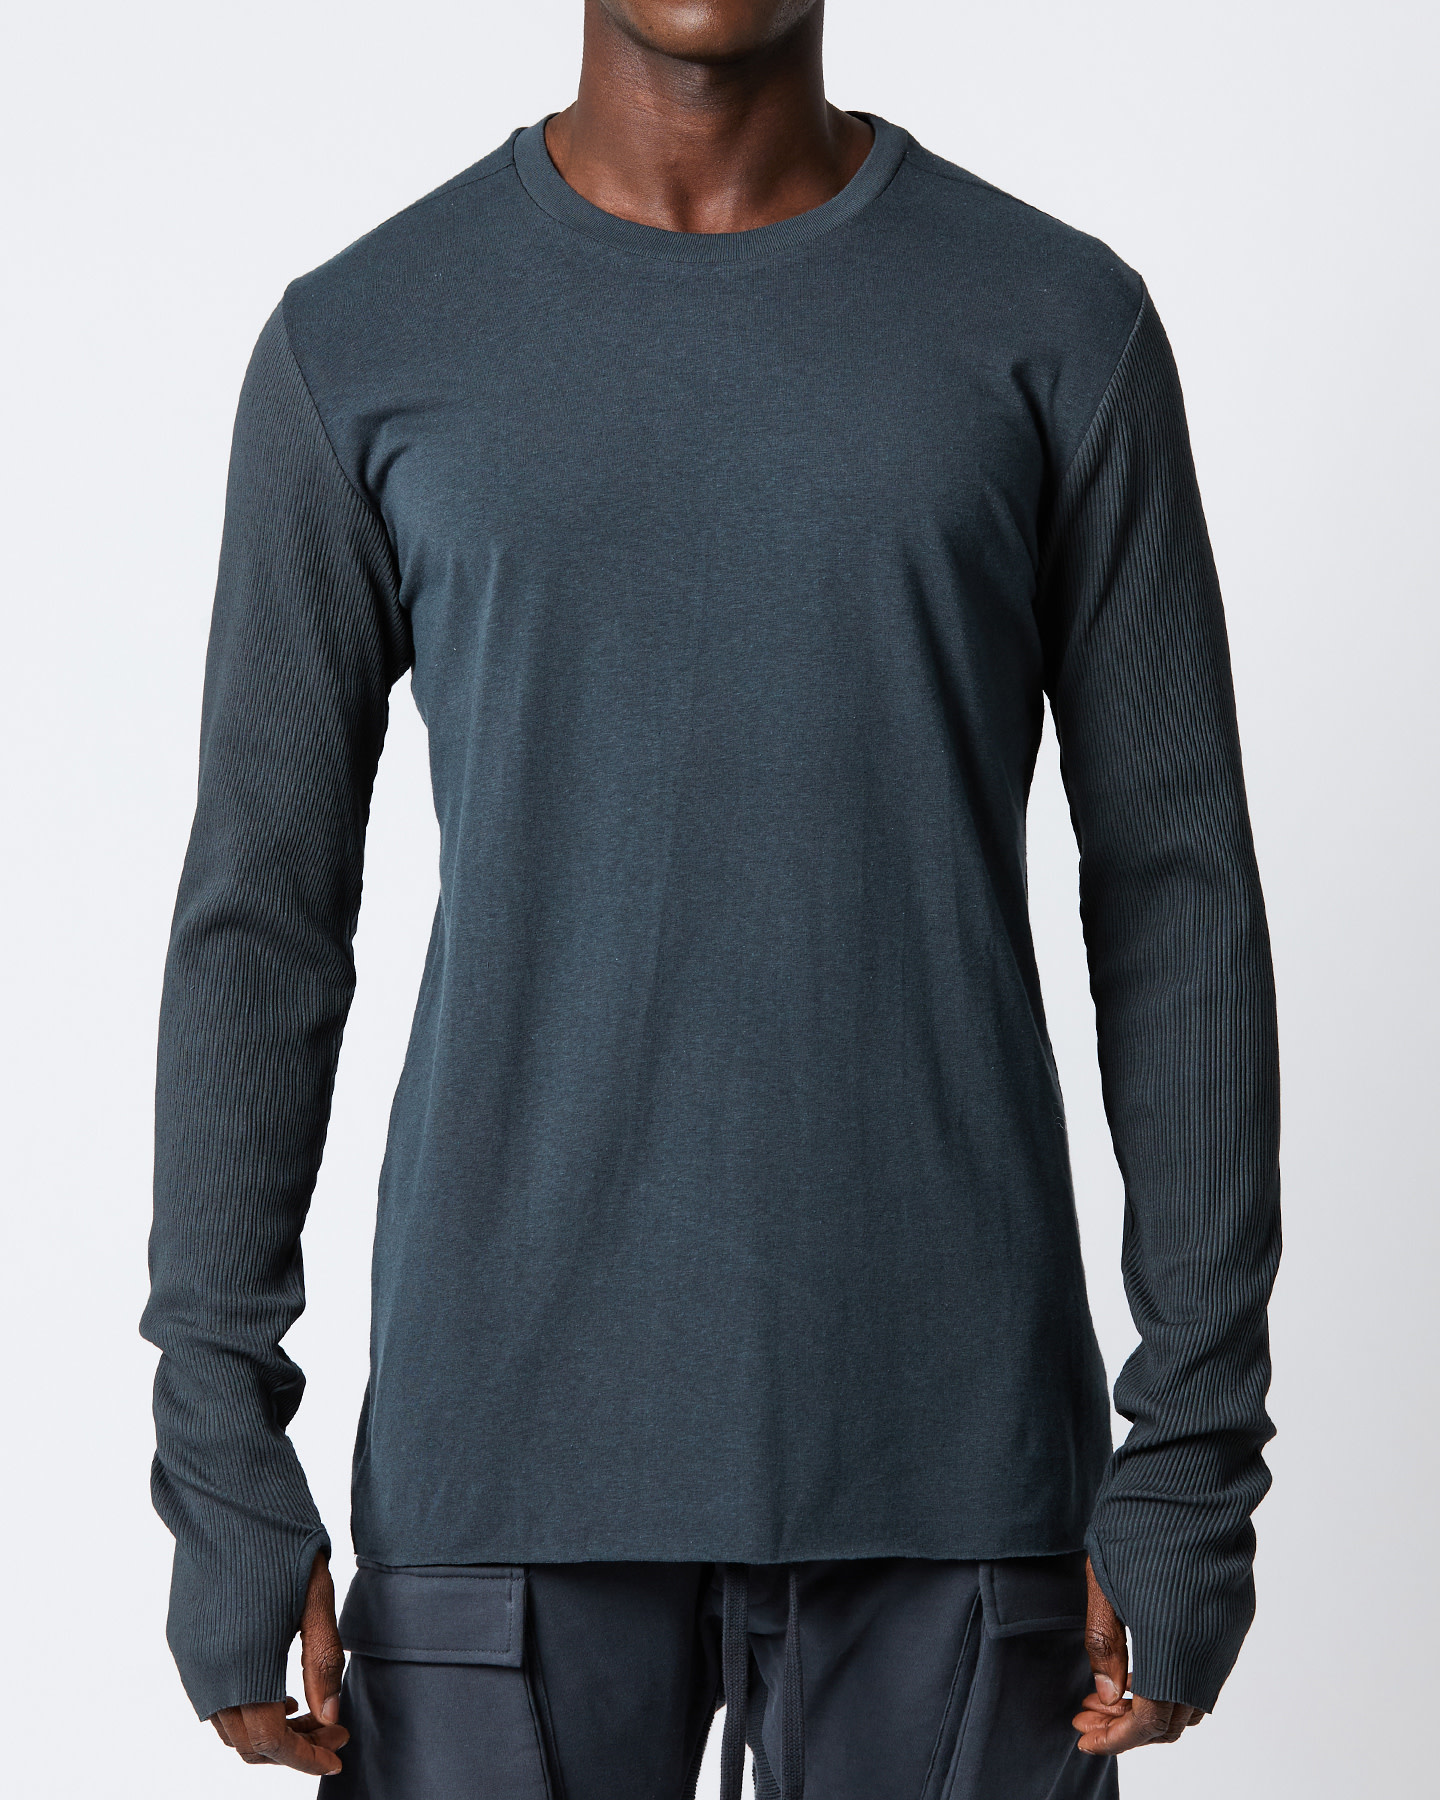 COTTON & BAMBOO RIB ARM FITTED LONGSLEEVE - FOREST